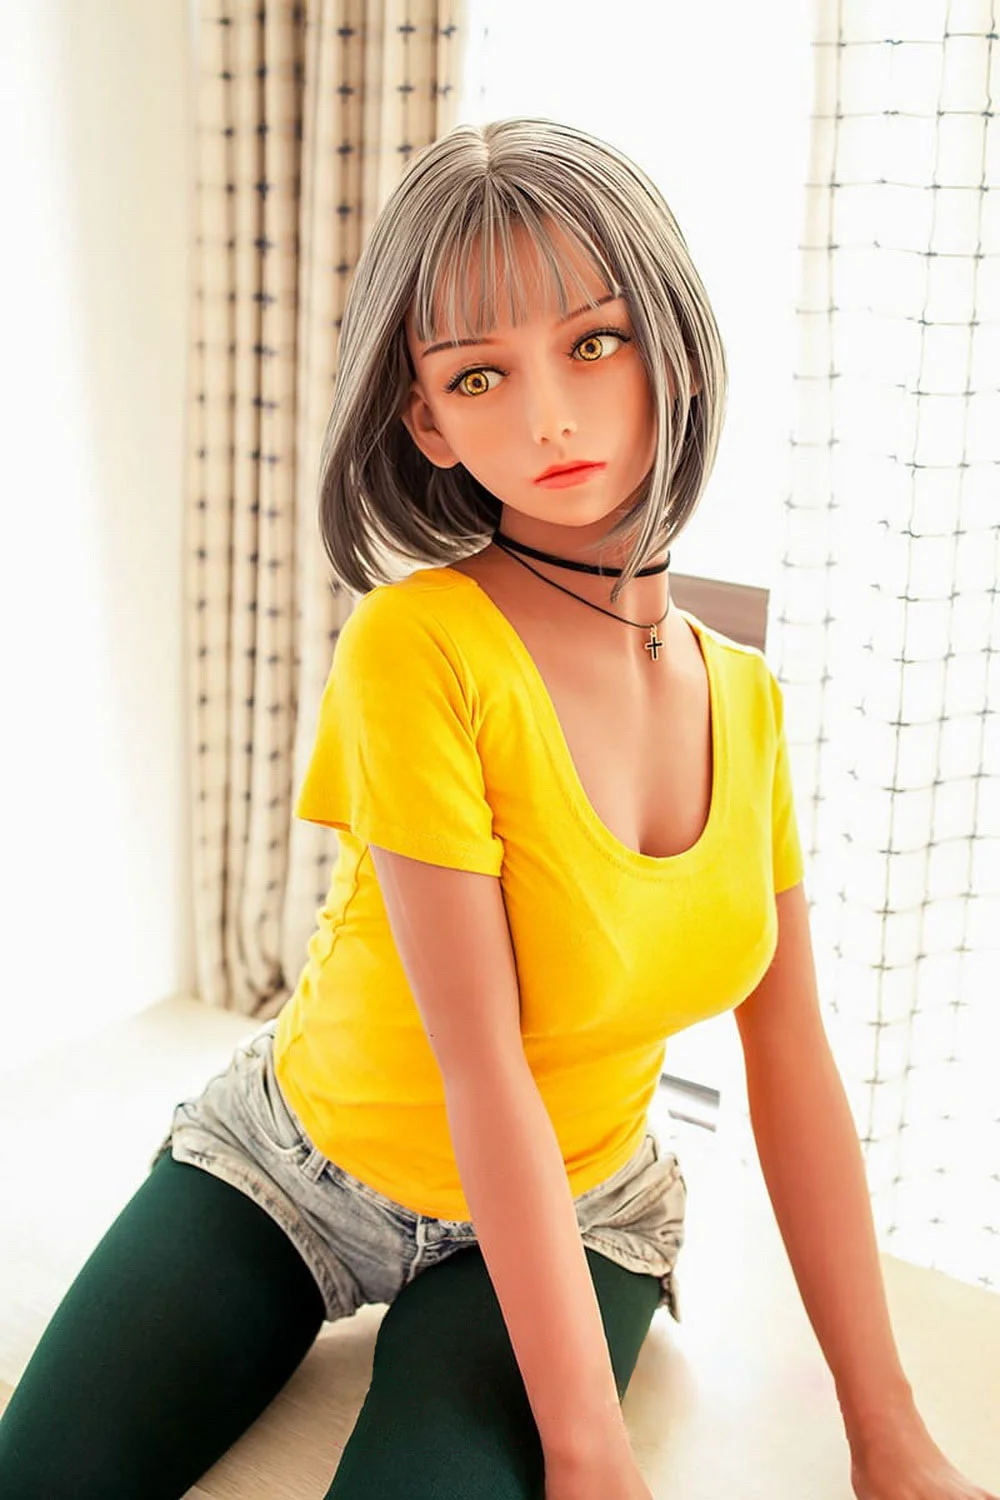 Anime sex doll wearing a necklace